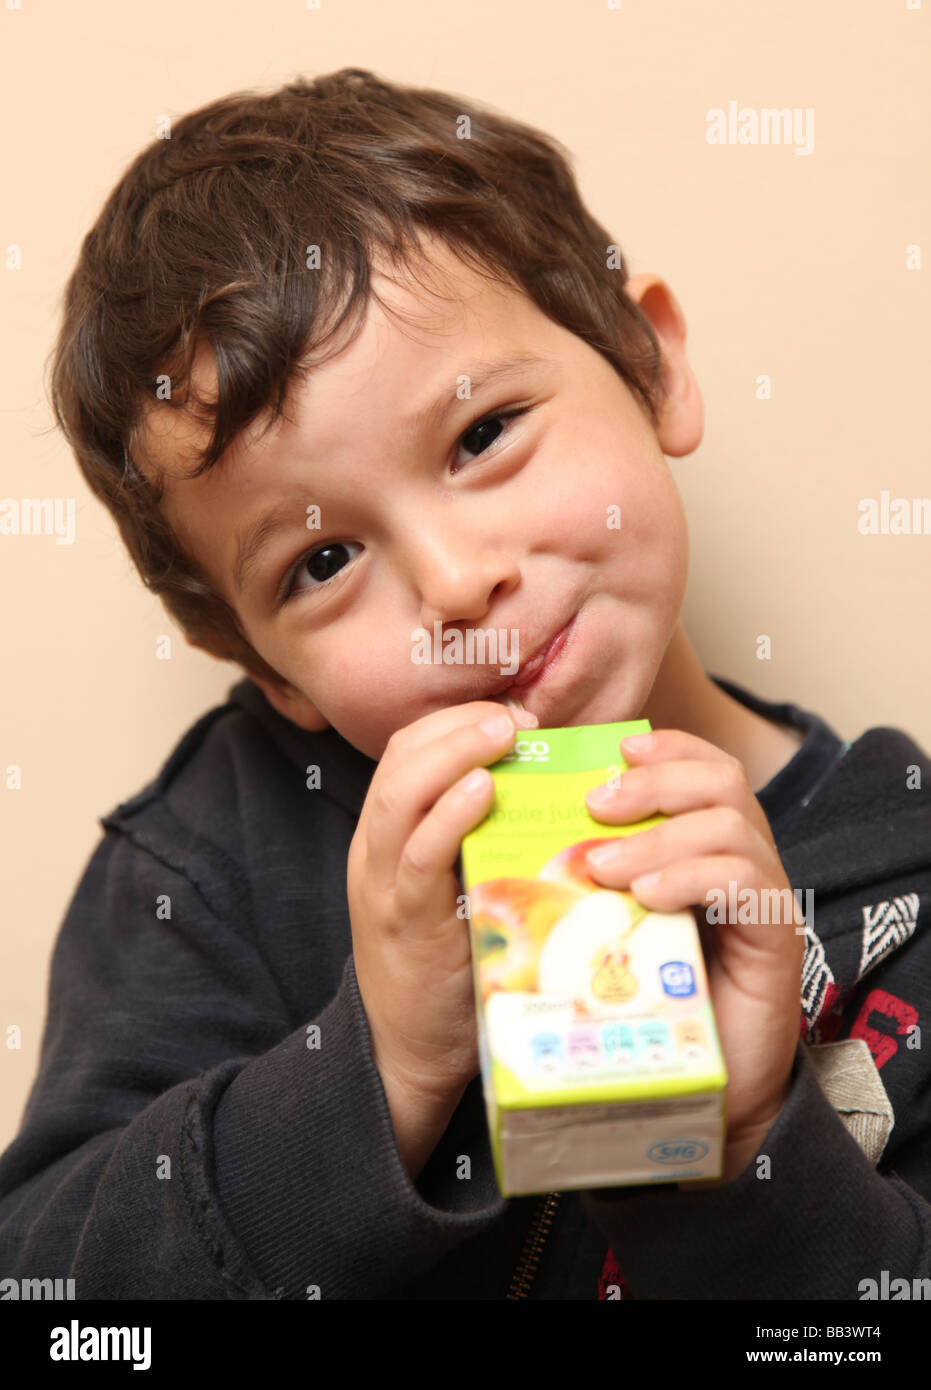 3 year old boy drinking a carton of juice Stock Photo